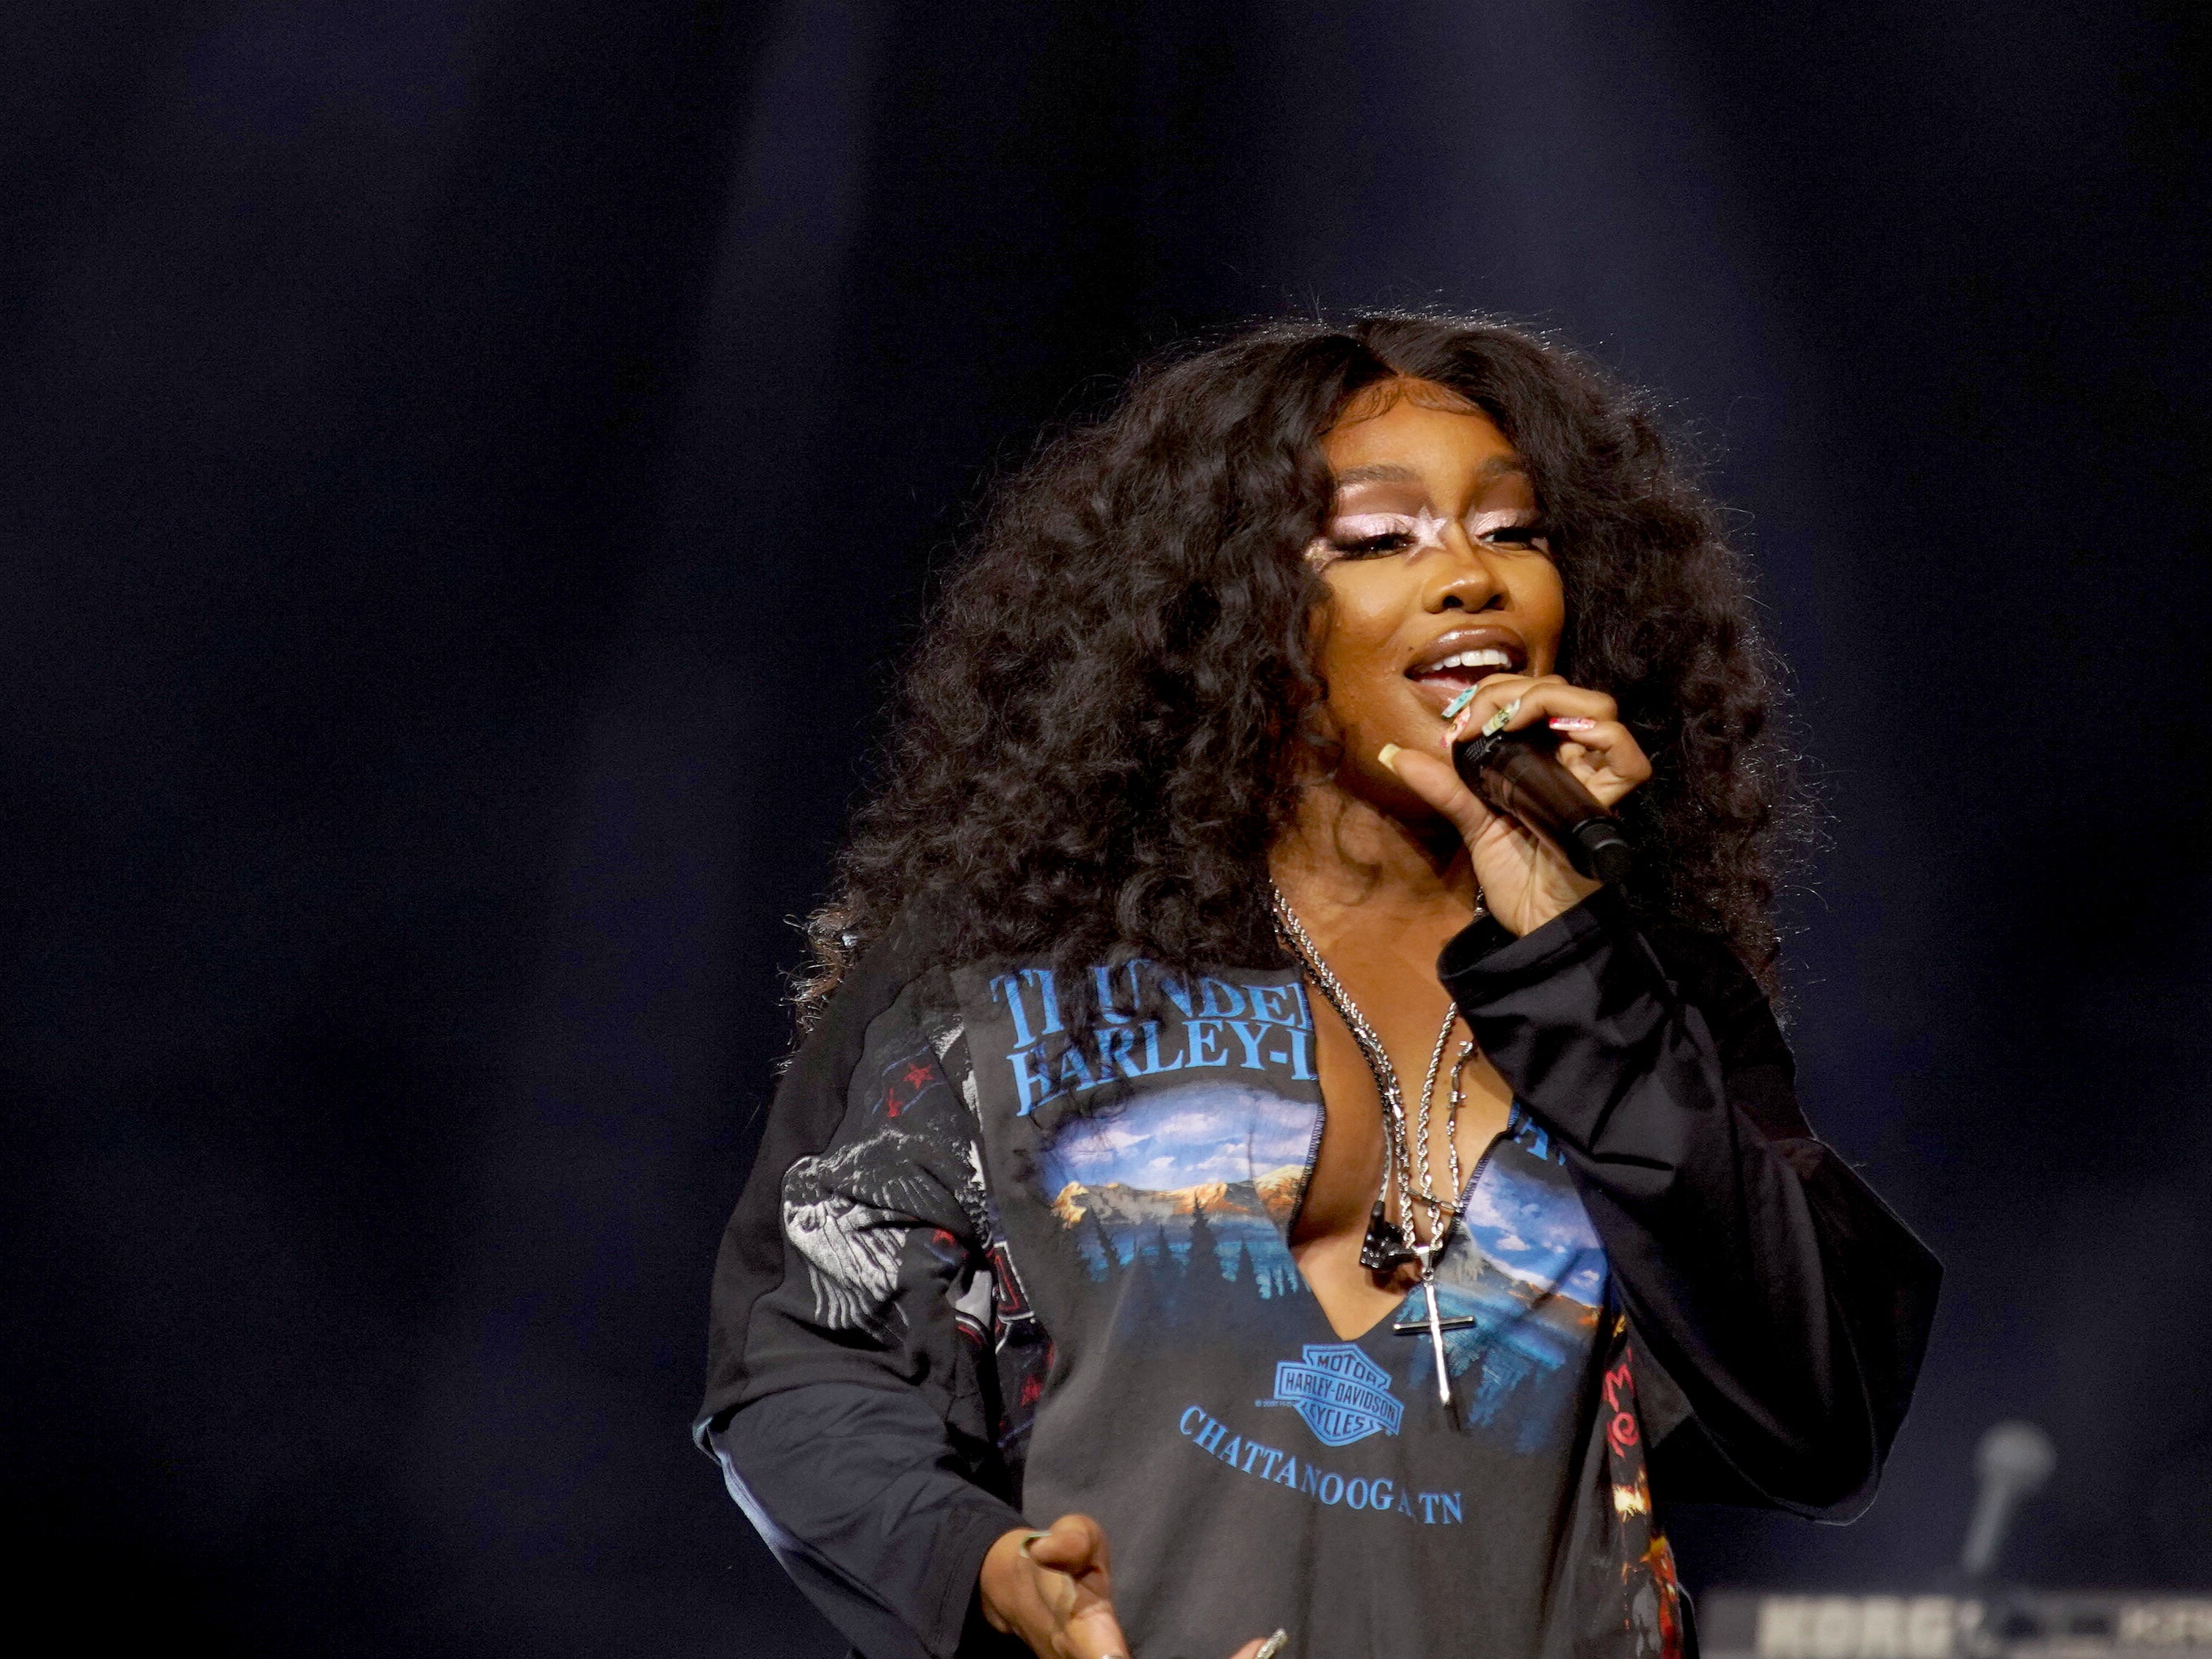 SZA, who sold out four nights at the O2 Arena last year, should be the ideal headliner